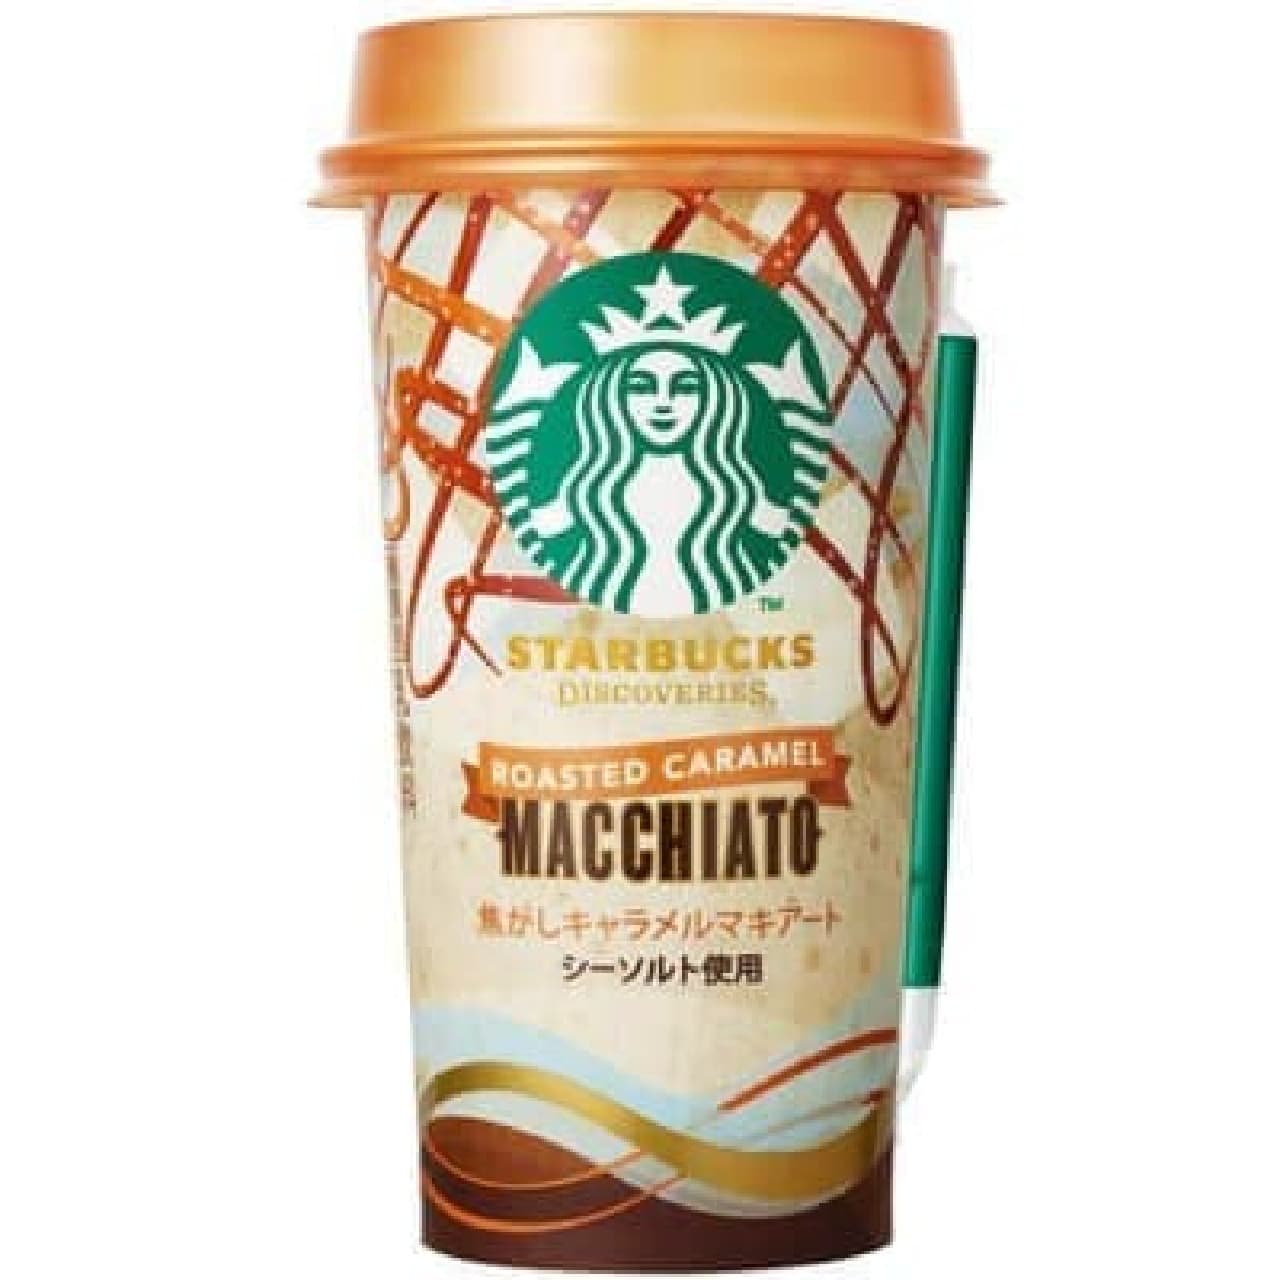 "Scorched Caramel Macchiato" is now available in Starbucks chilled cups!